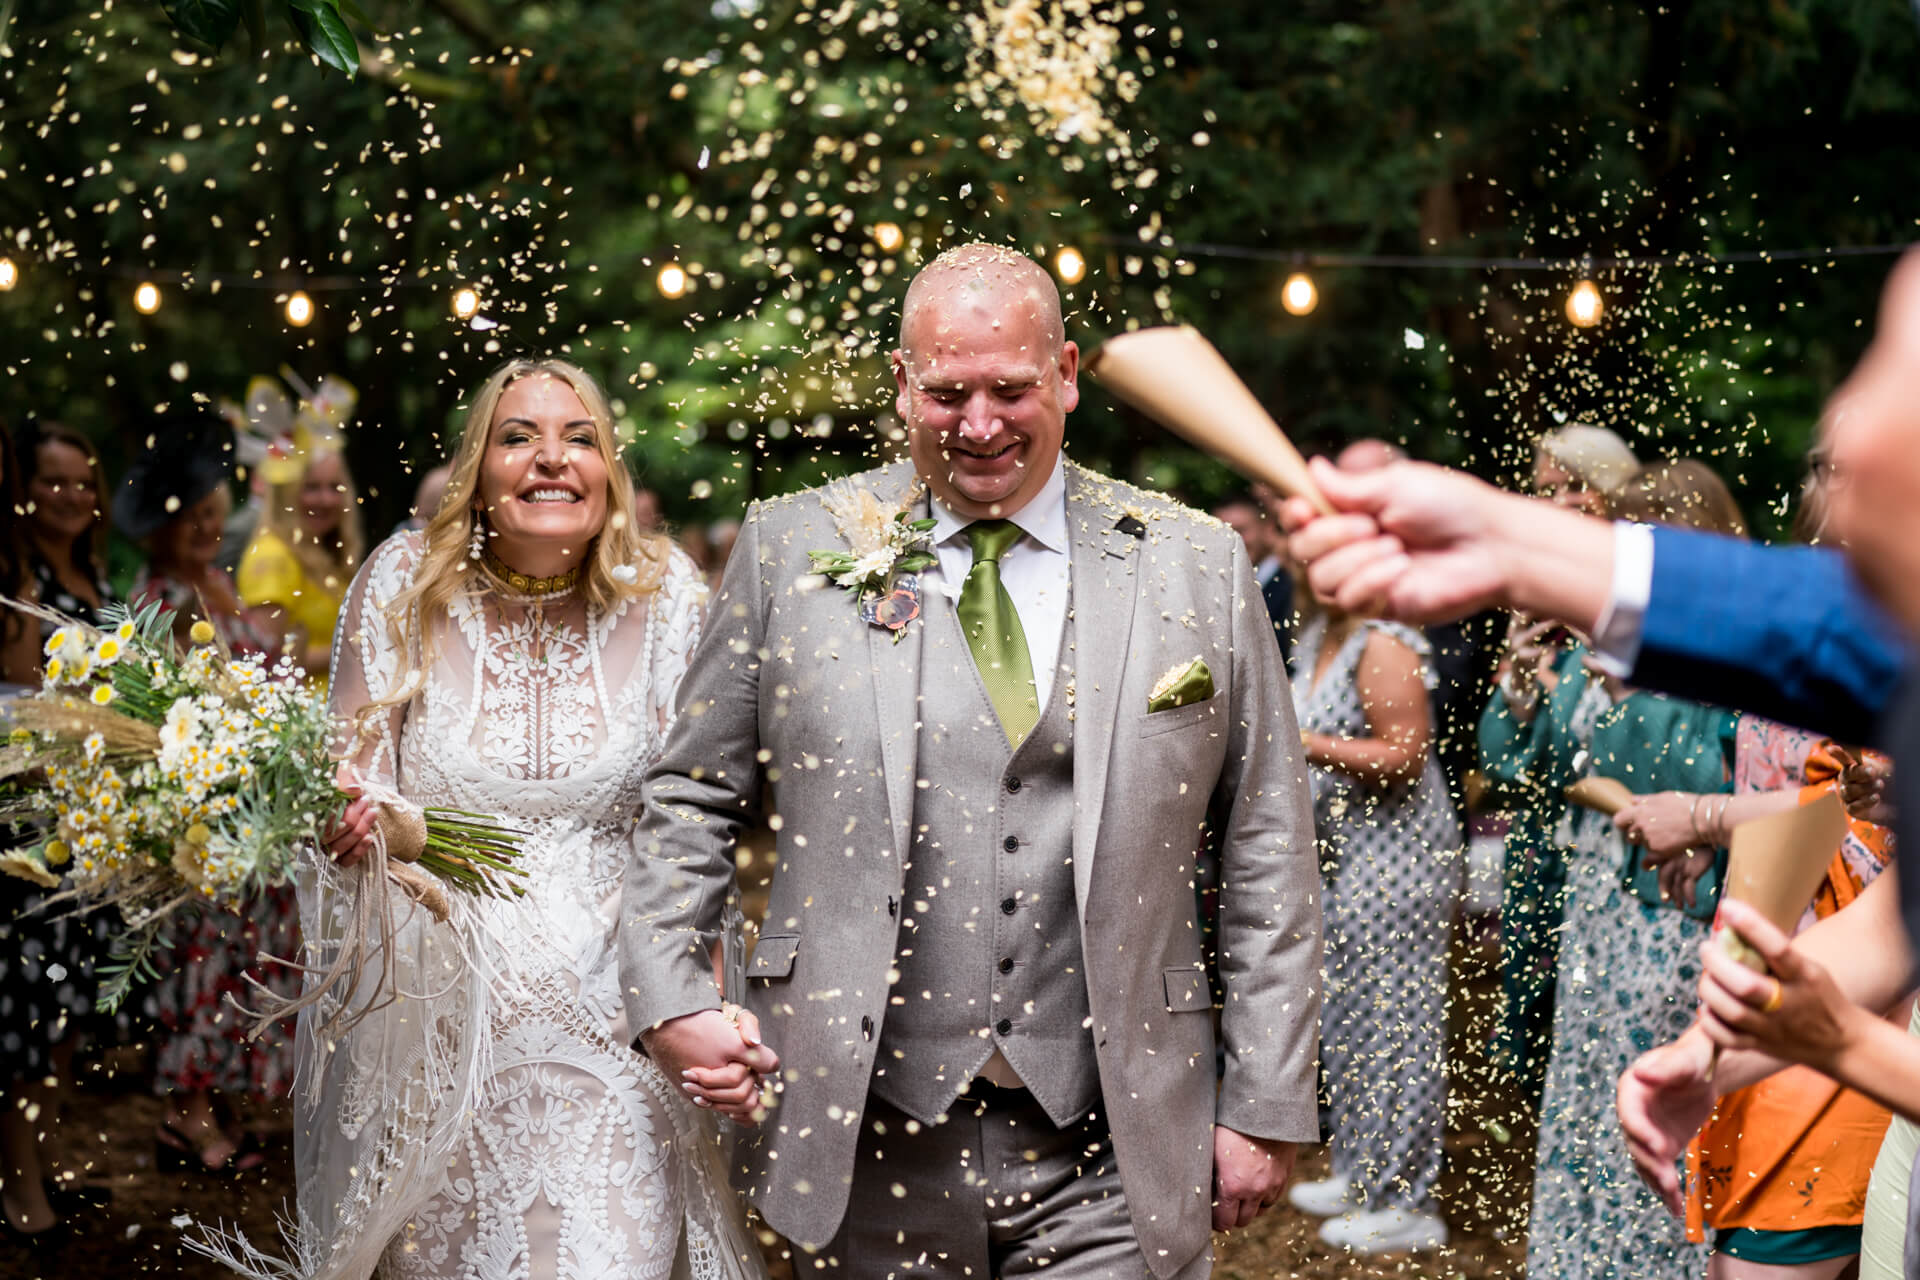 Bride and groom smiling with confetti at forest wedding.